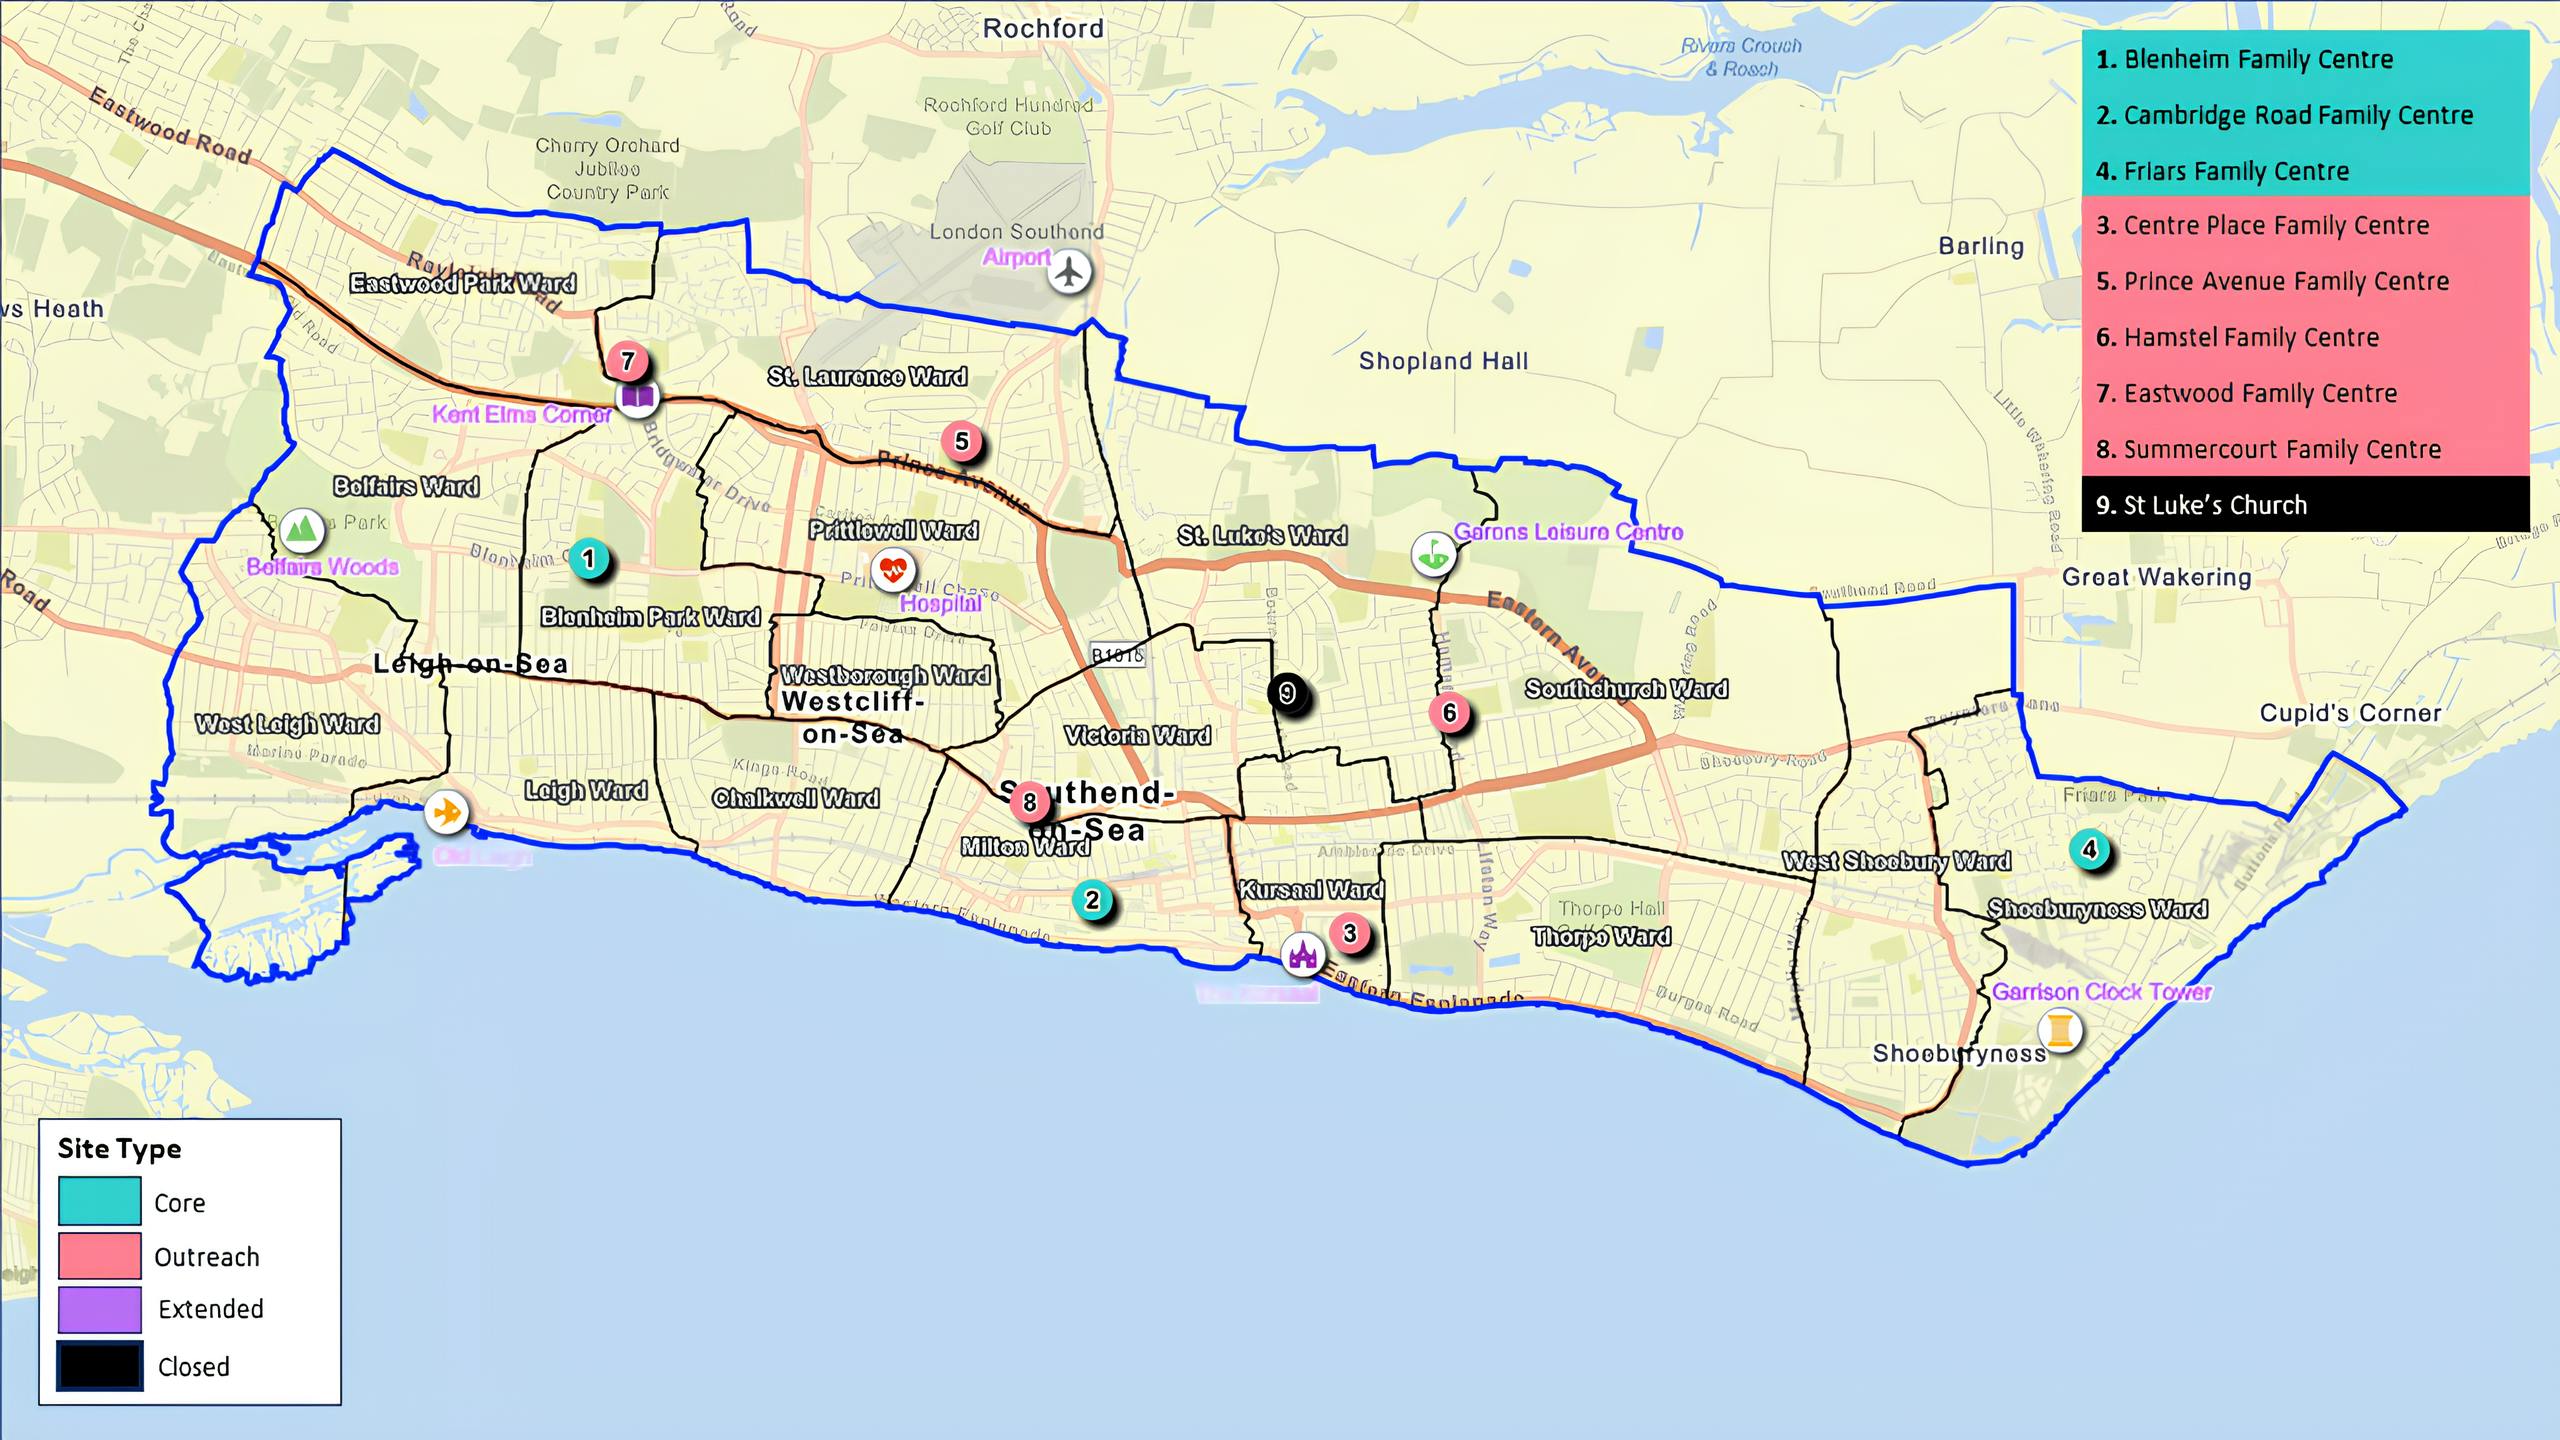 MAP 2 – 8 pins depicting the proposed sites for Family Centres in Option 1.png